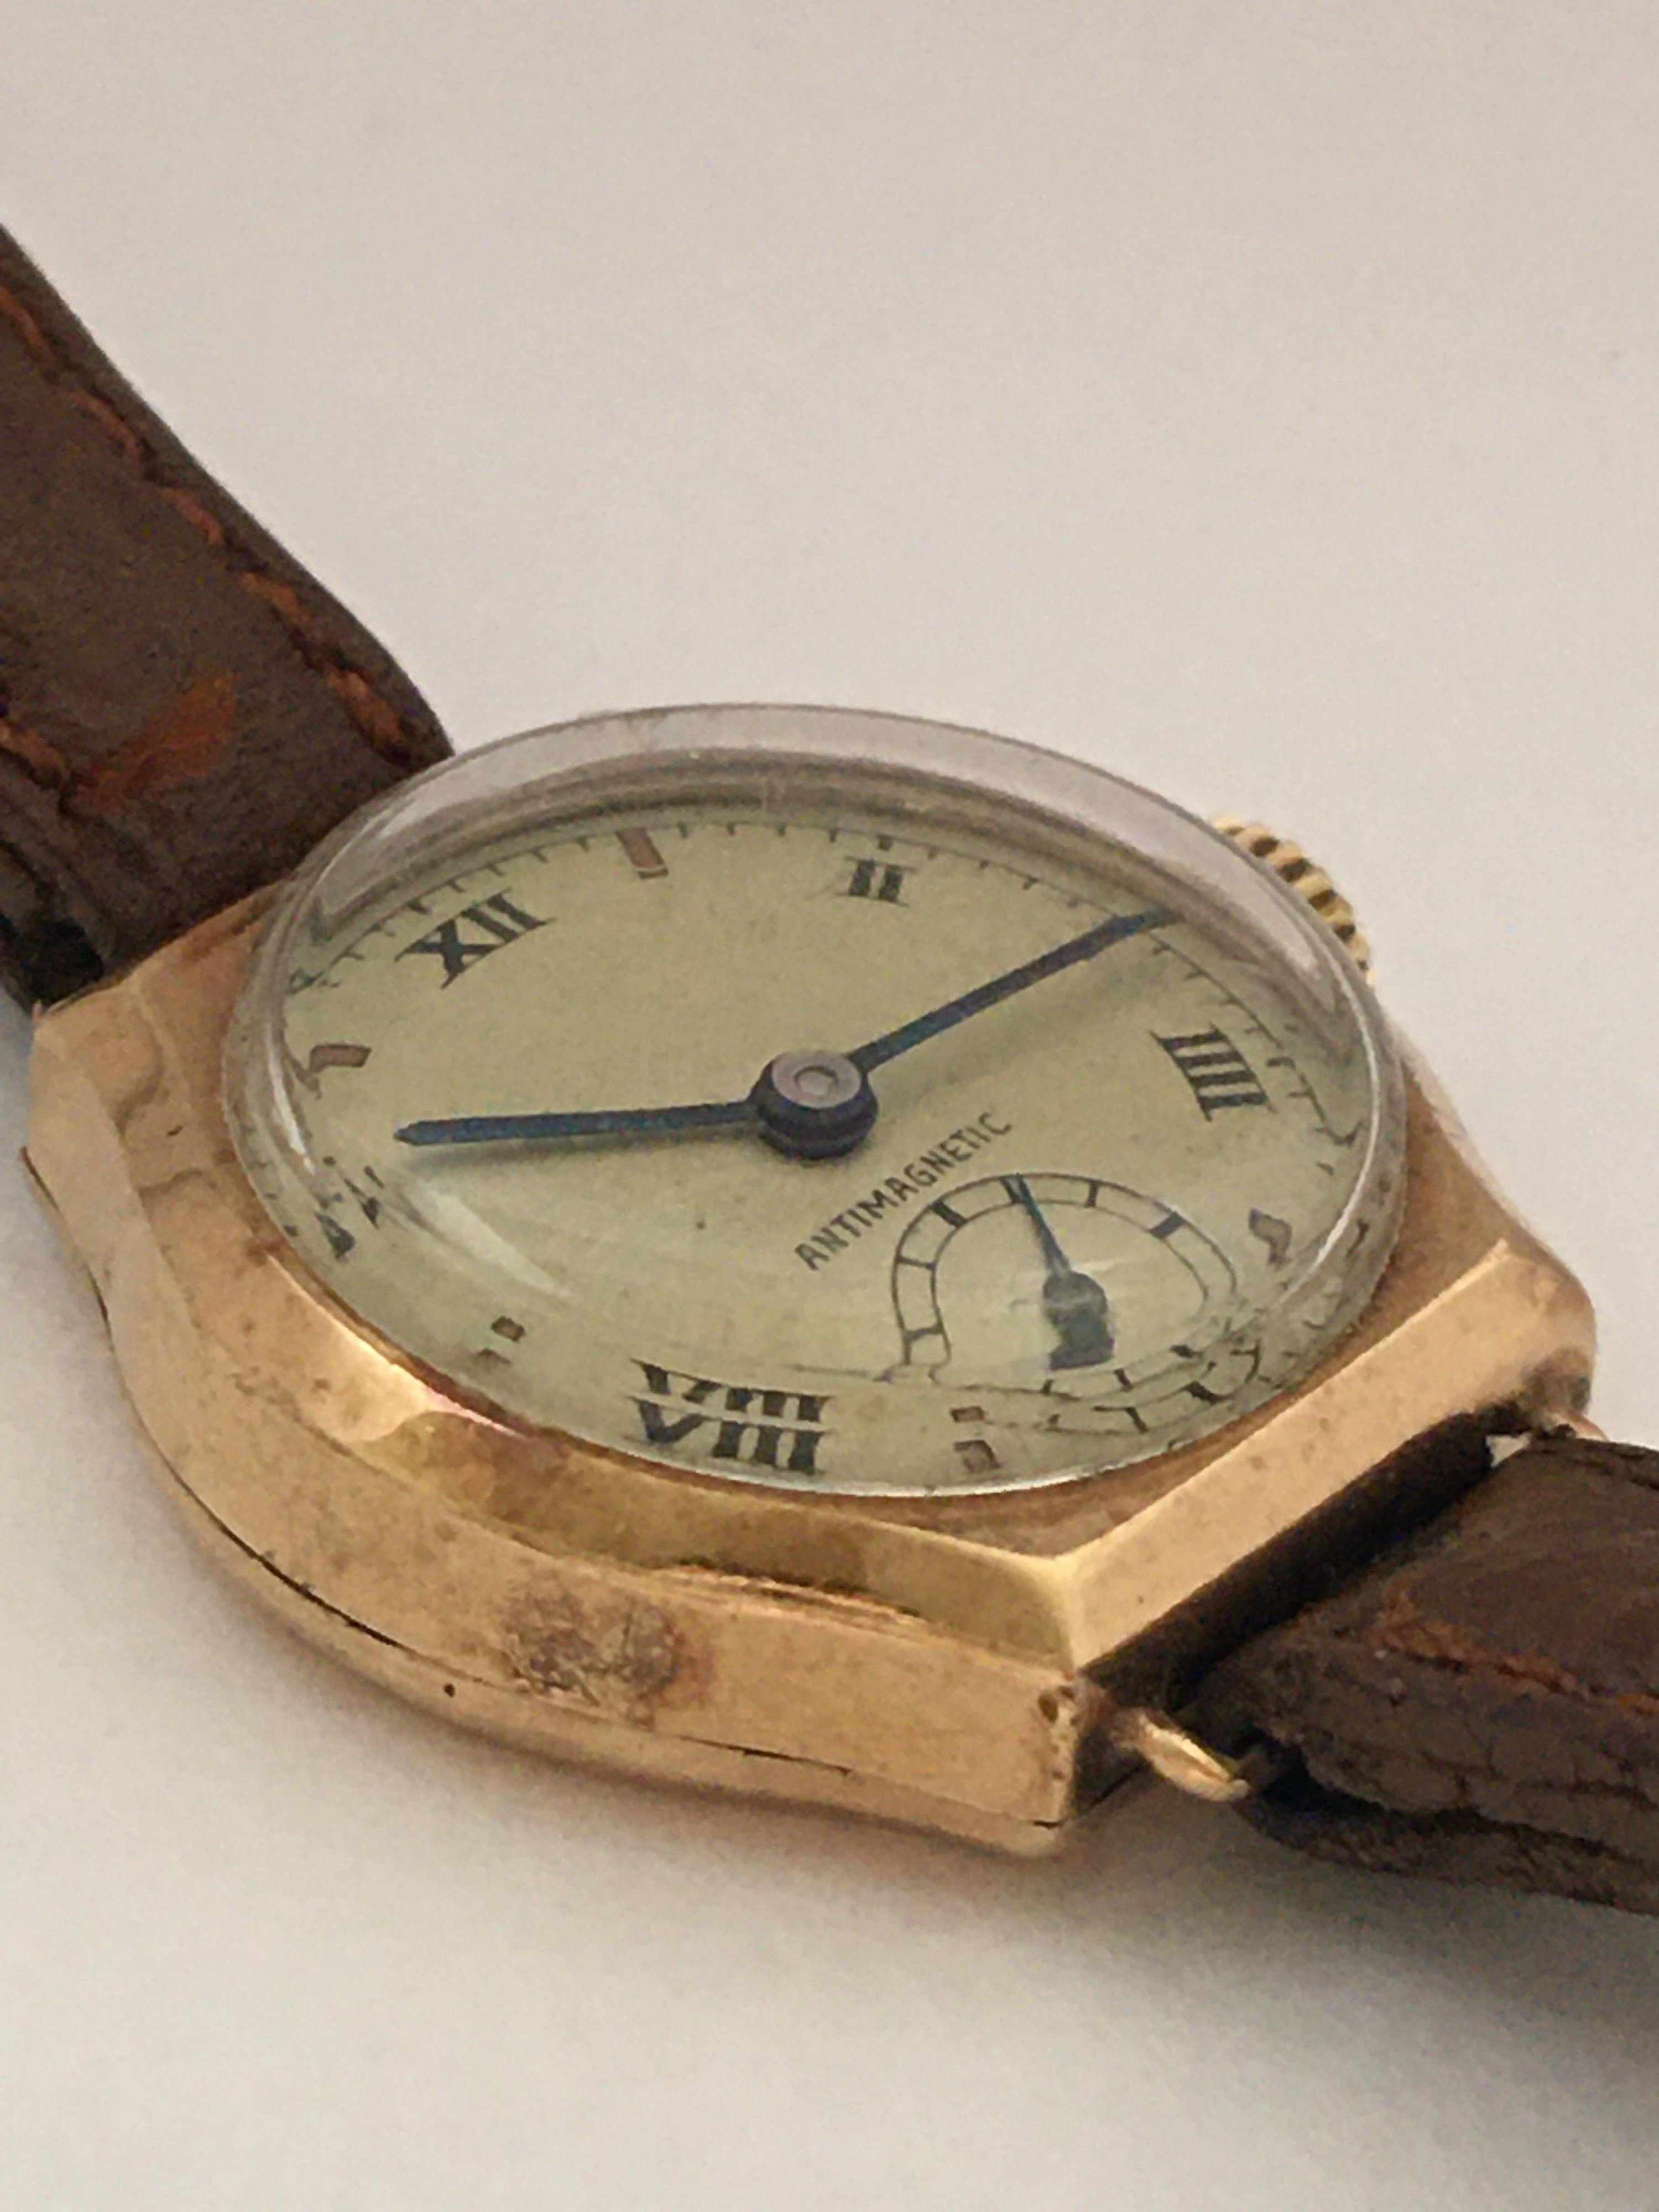 9 Karat Gold Vintage 1940s Mechanical Ladies Watch In Good Condition For Sale In Carlisle, GB